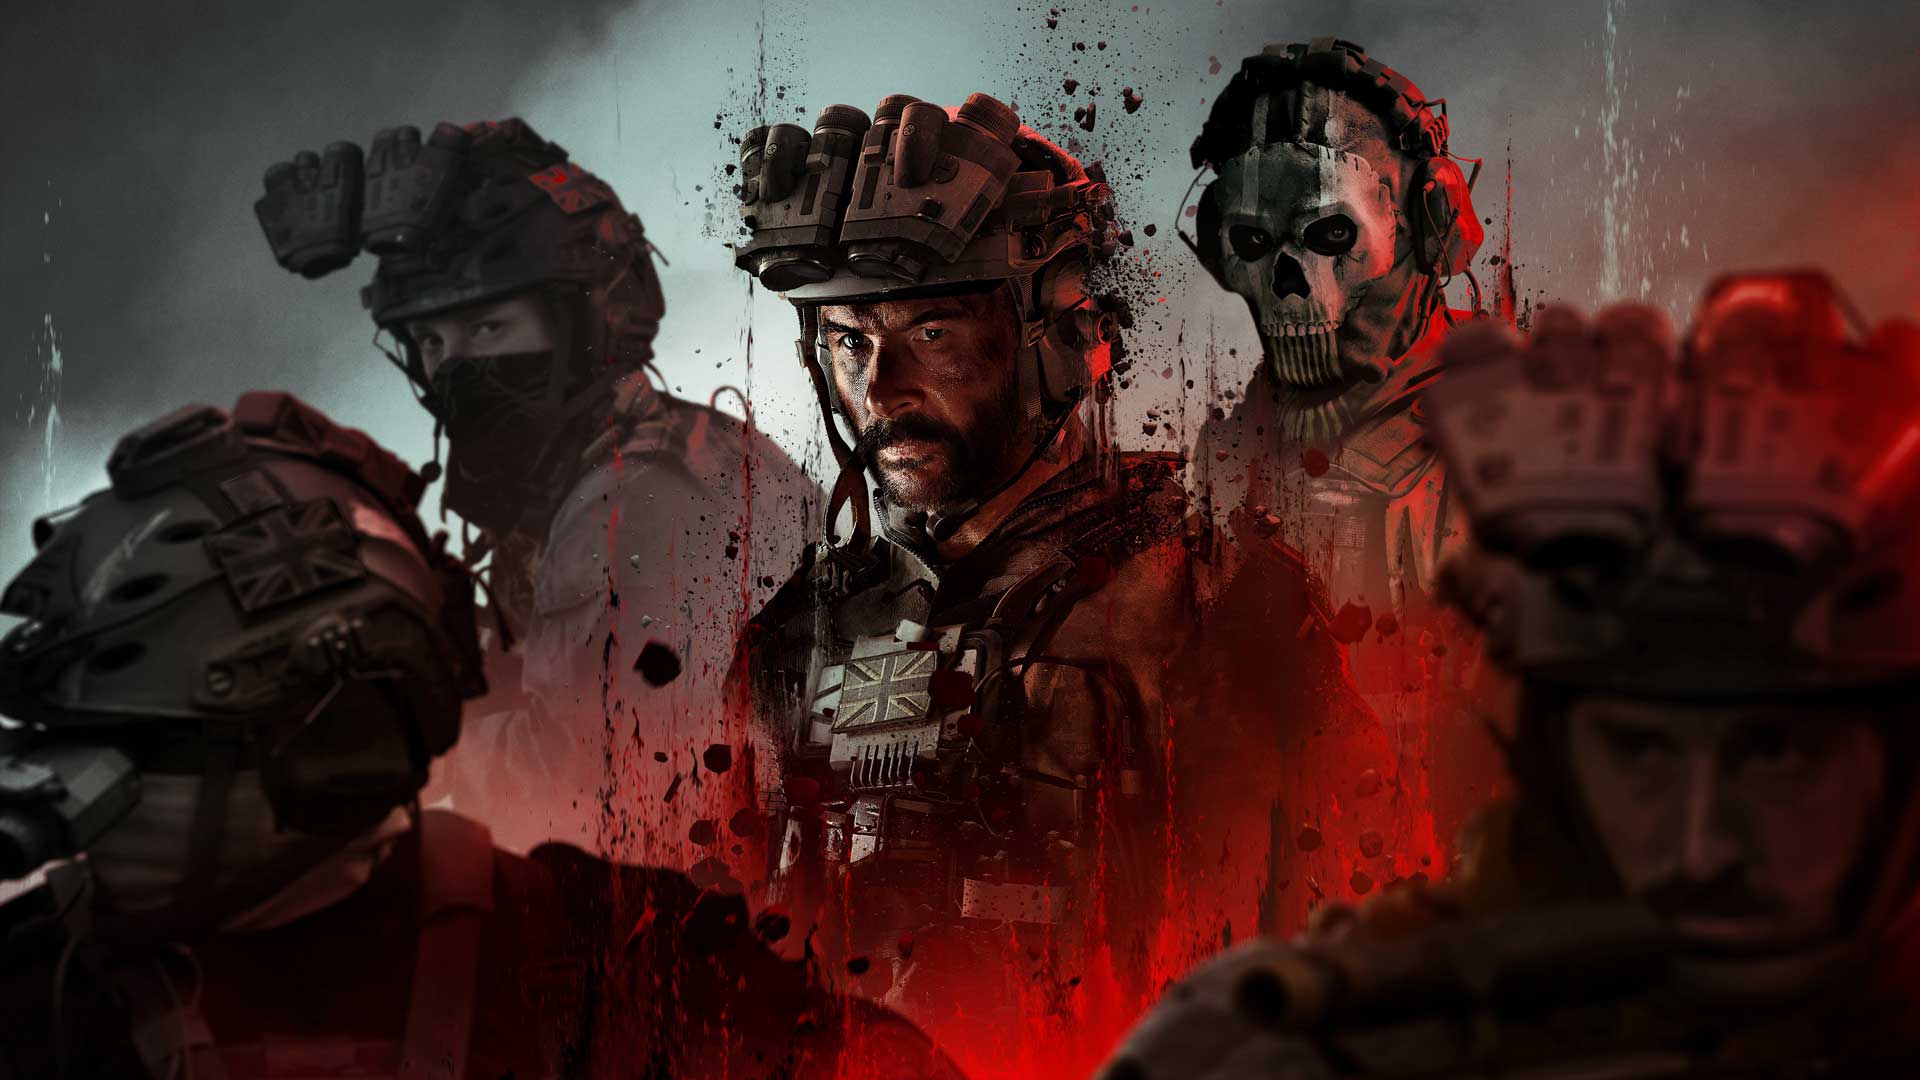 Call of Duty: Warzone Mobile [Trailers] - IGN